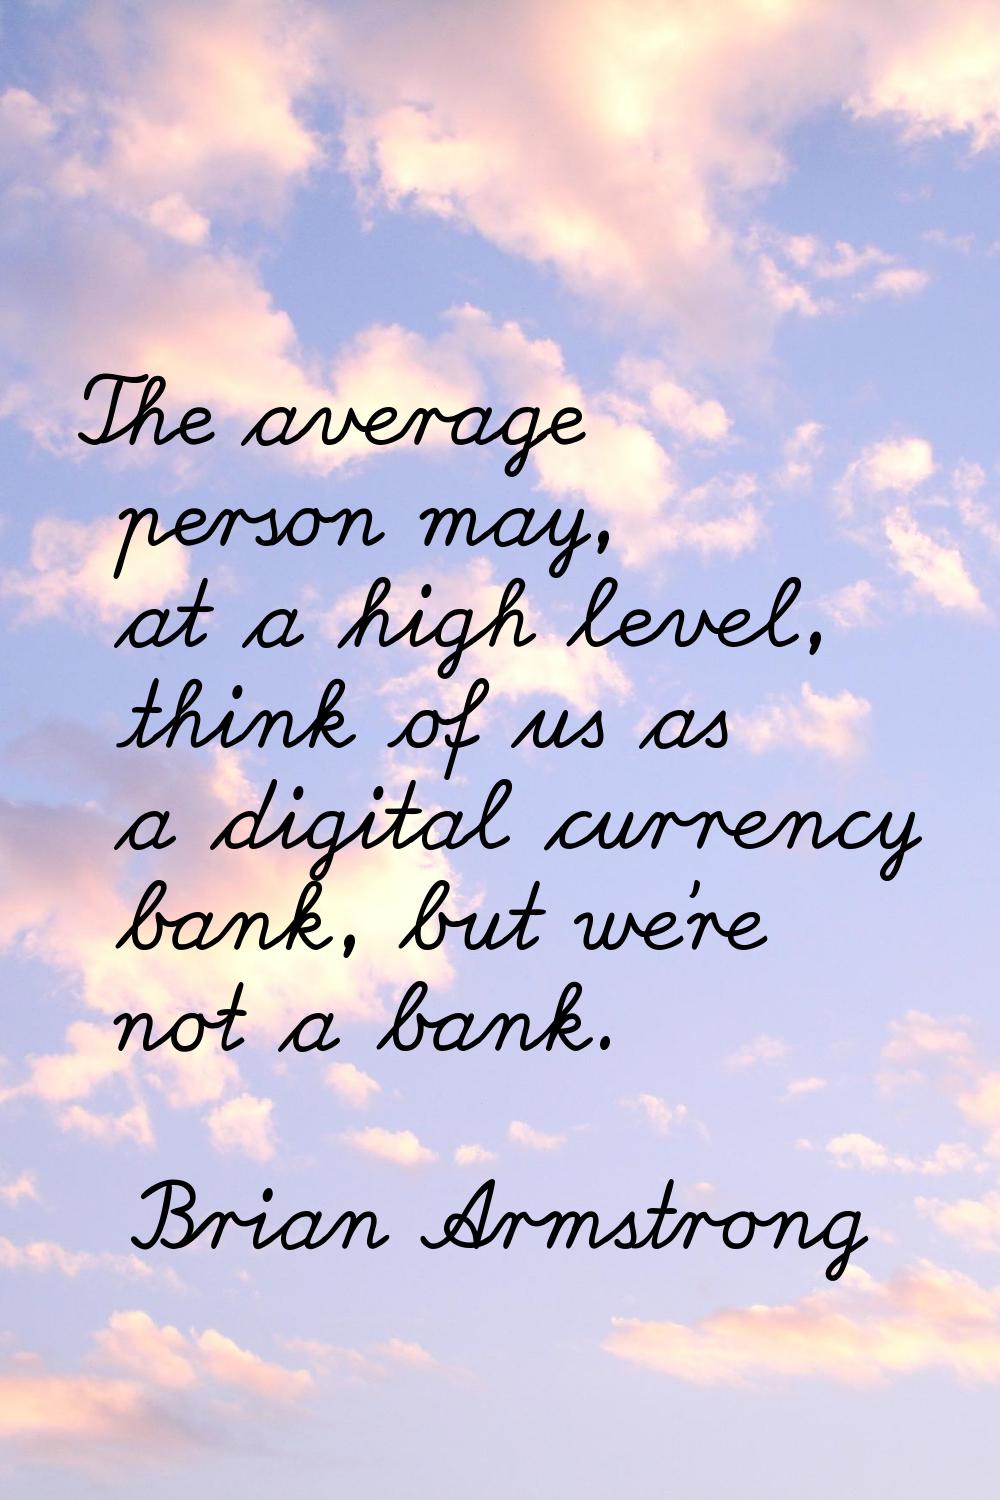 The average person may, at a high level, think of us as a digital currency bank, but we're not a ba